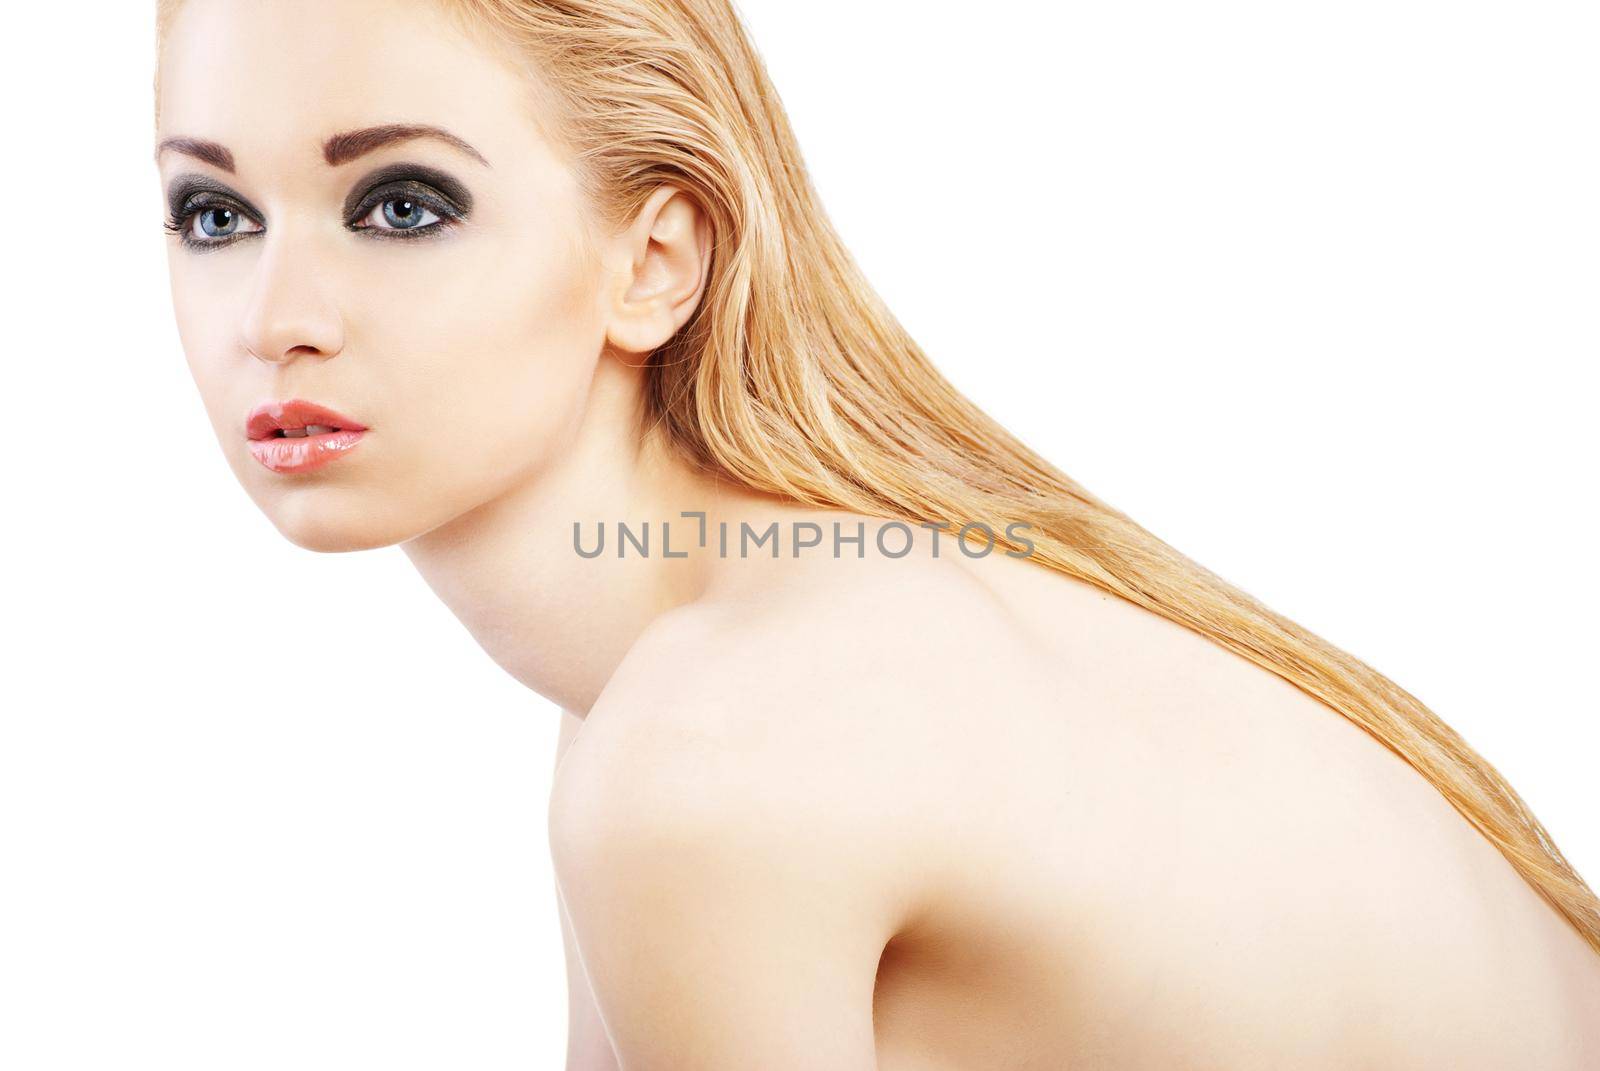 Beautiful young blond woman with beauty make-up over white background